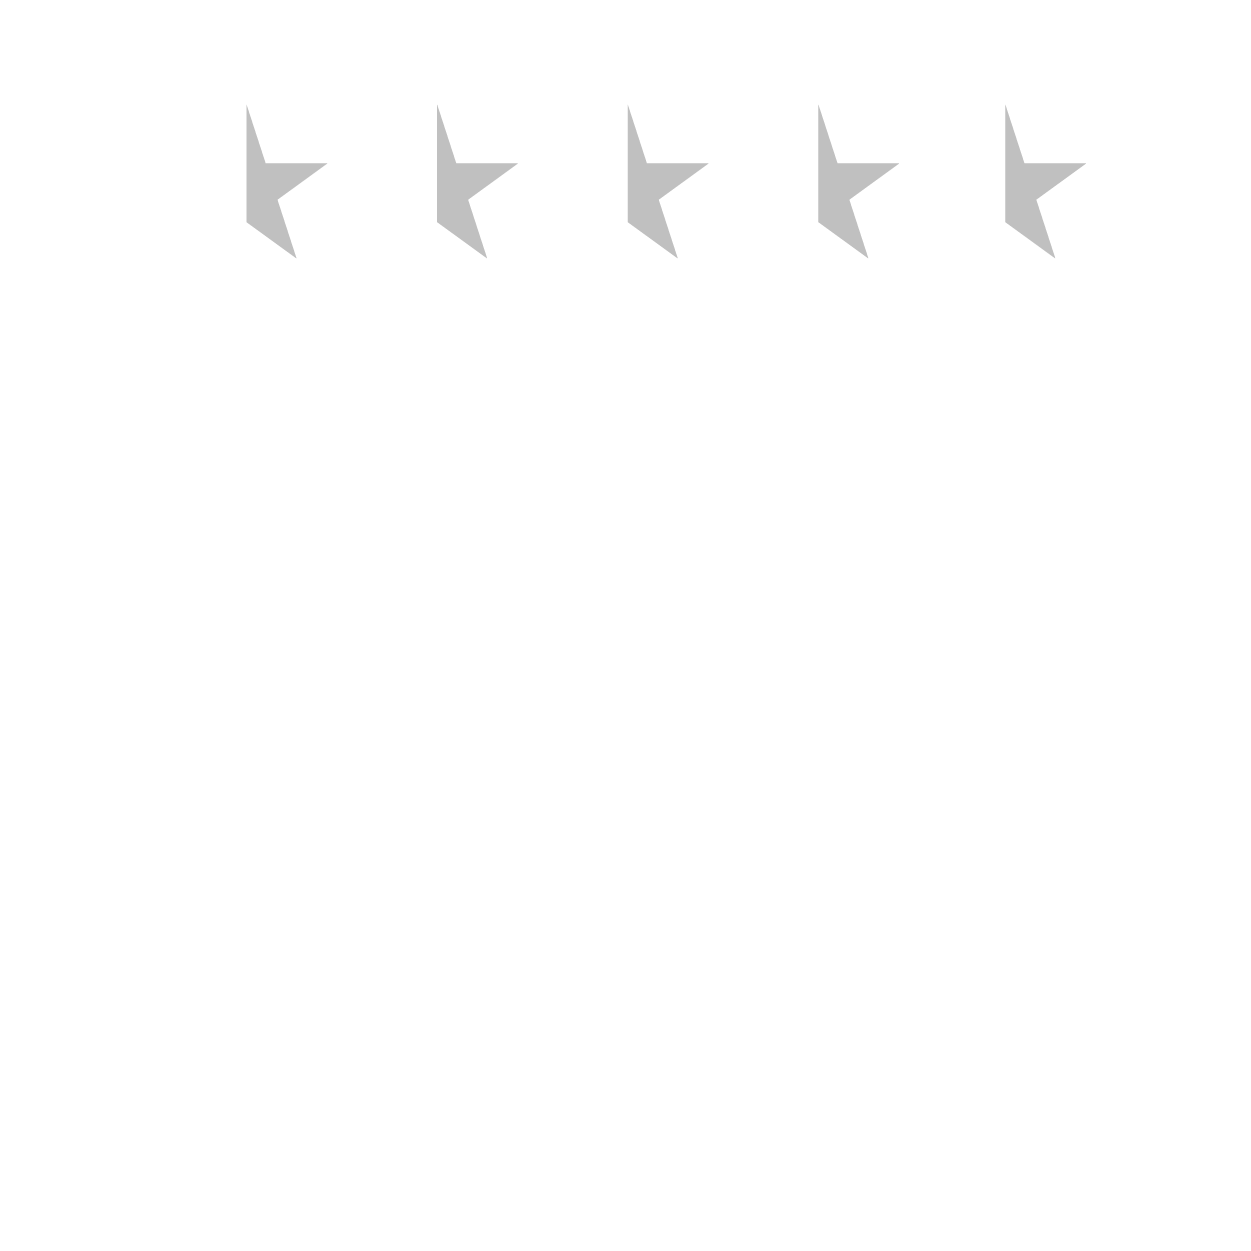 A recent five-star review for A Step Ahead Podiatry said "I wouldn't trust anyone else with my feet"